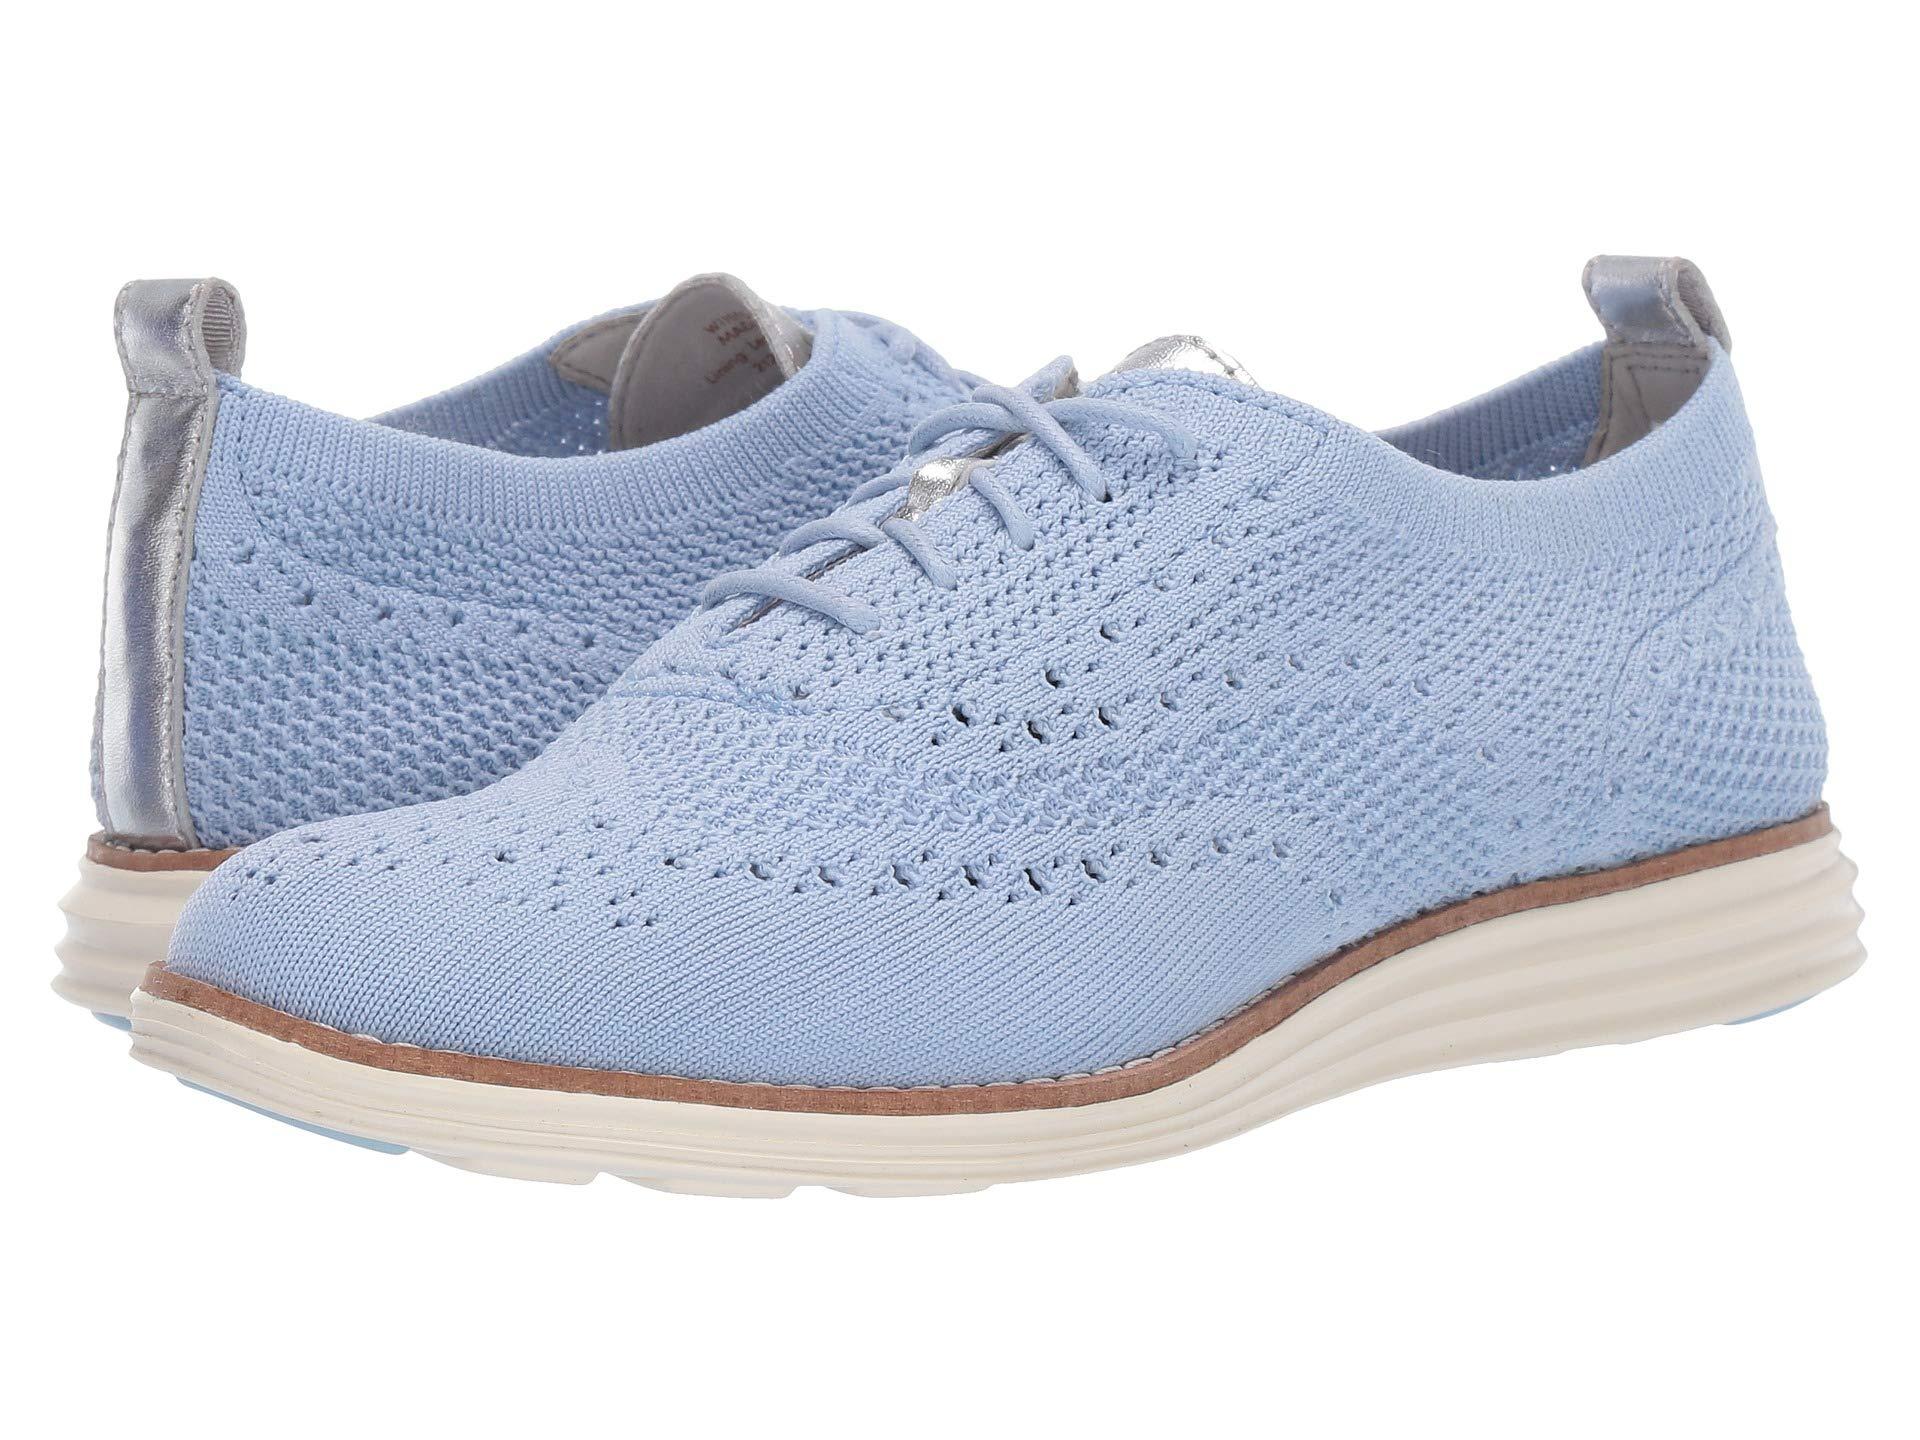 Cole Haan Rubber Original Grand Stitchlite Wing Oxford in Blue - Lyst